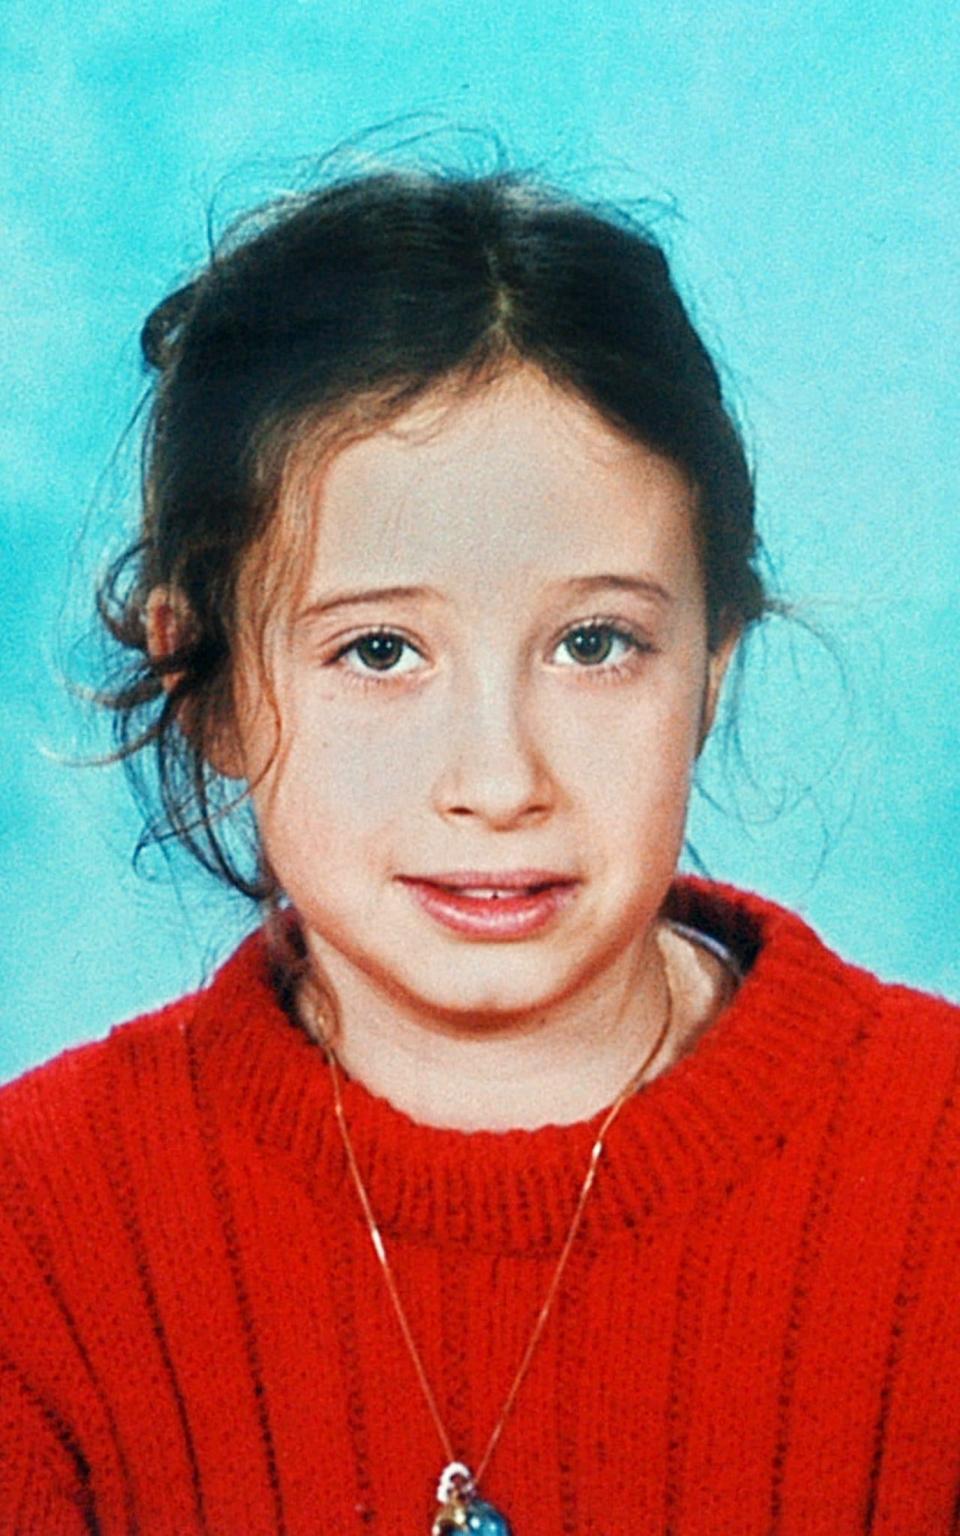 Estelle Mouzin, a 9 years old child who is missing since 2003. - AFP